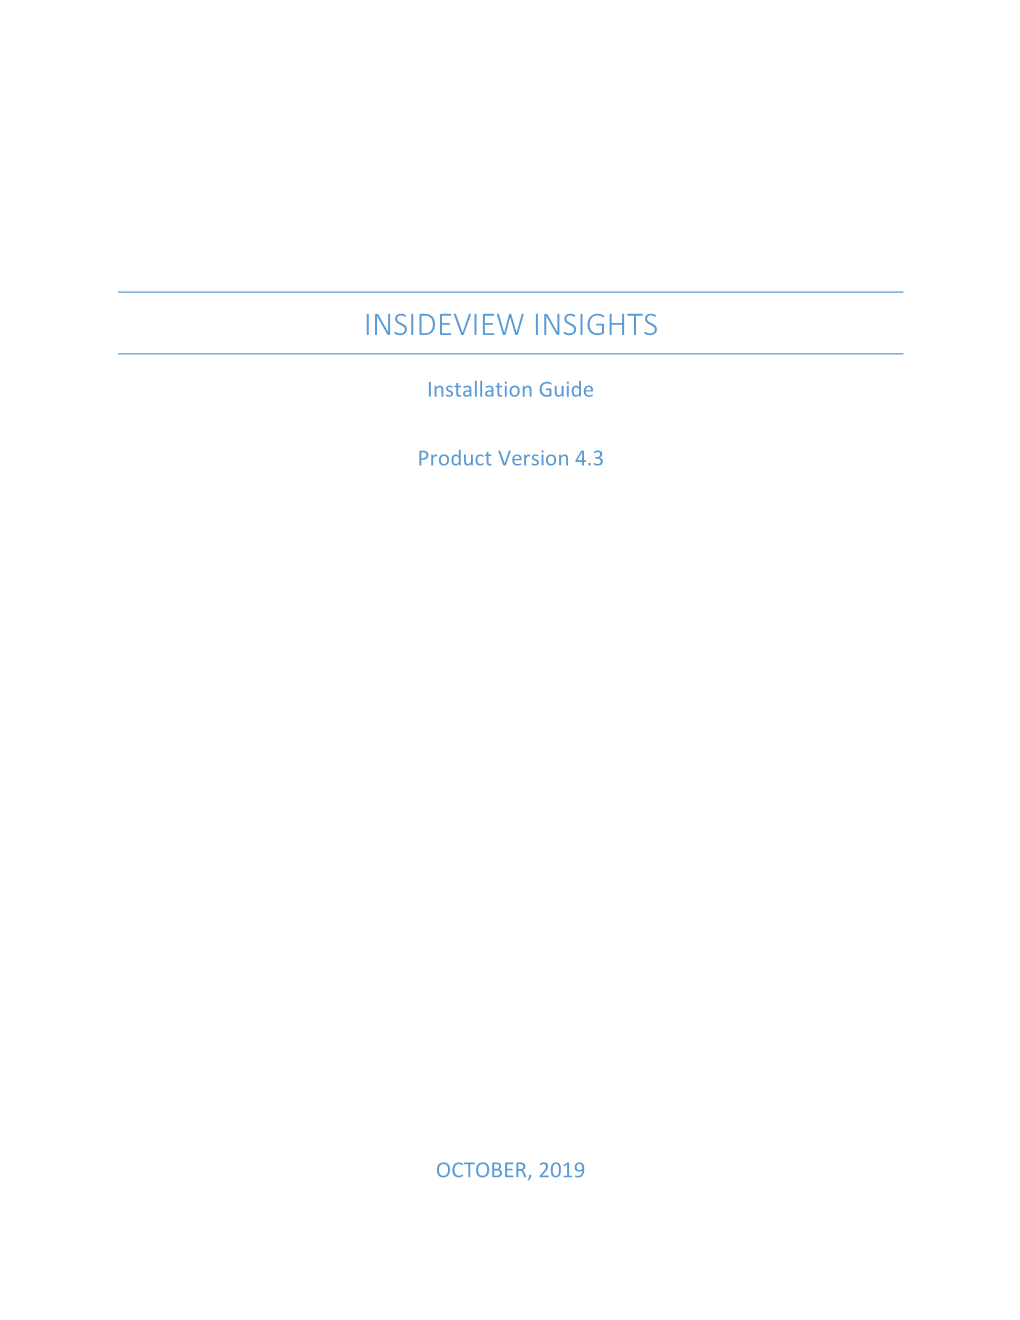 Insideview Insights